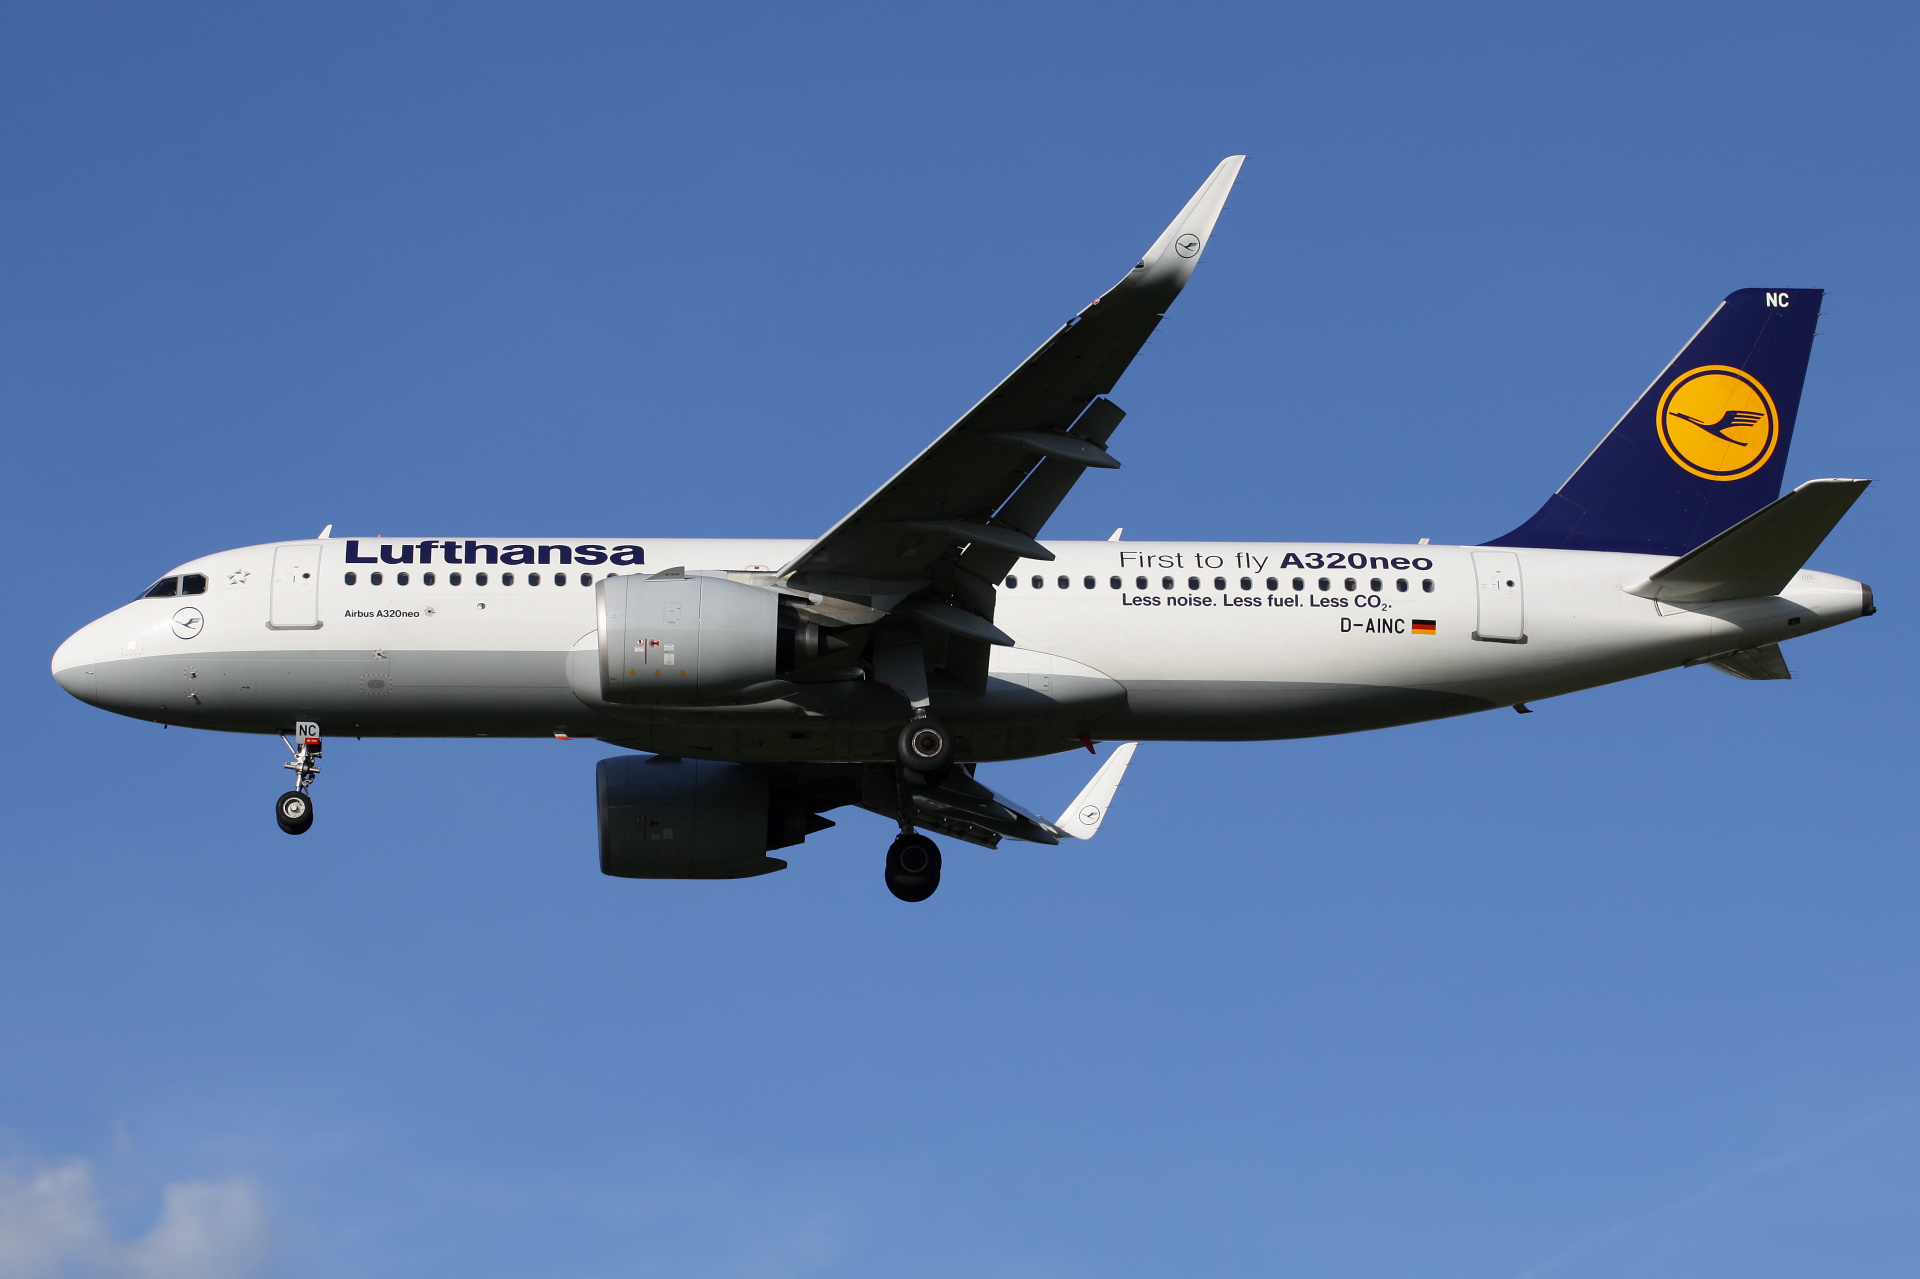 D-AINC (First to fly livery) (Aircraft » EPWA Spotting » Airbus A320neo » Lufthansa)